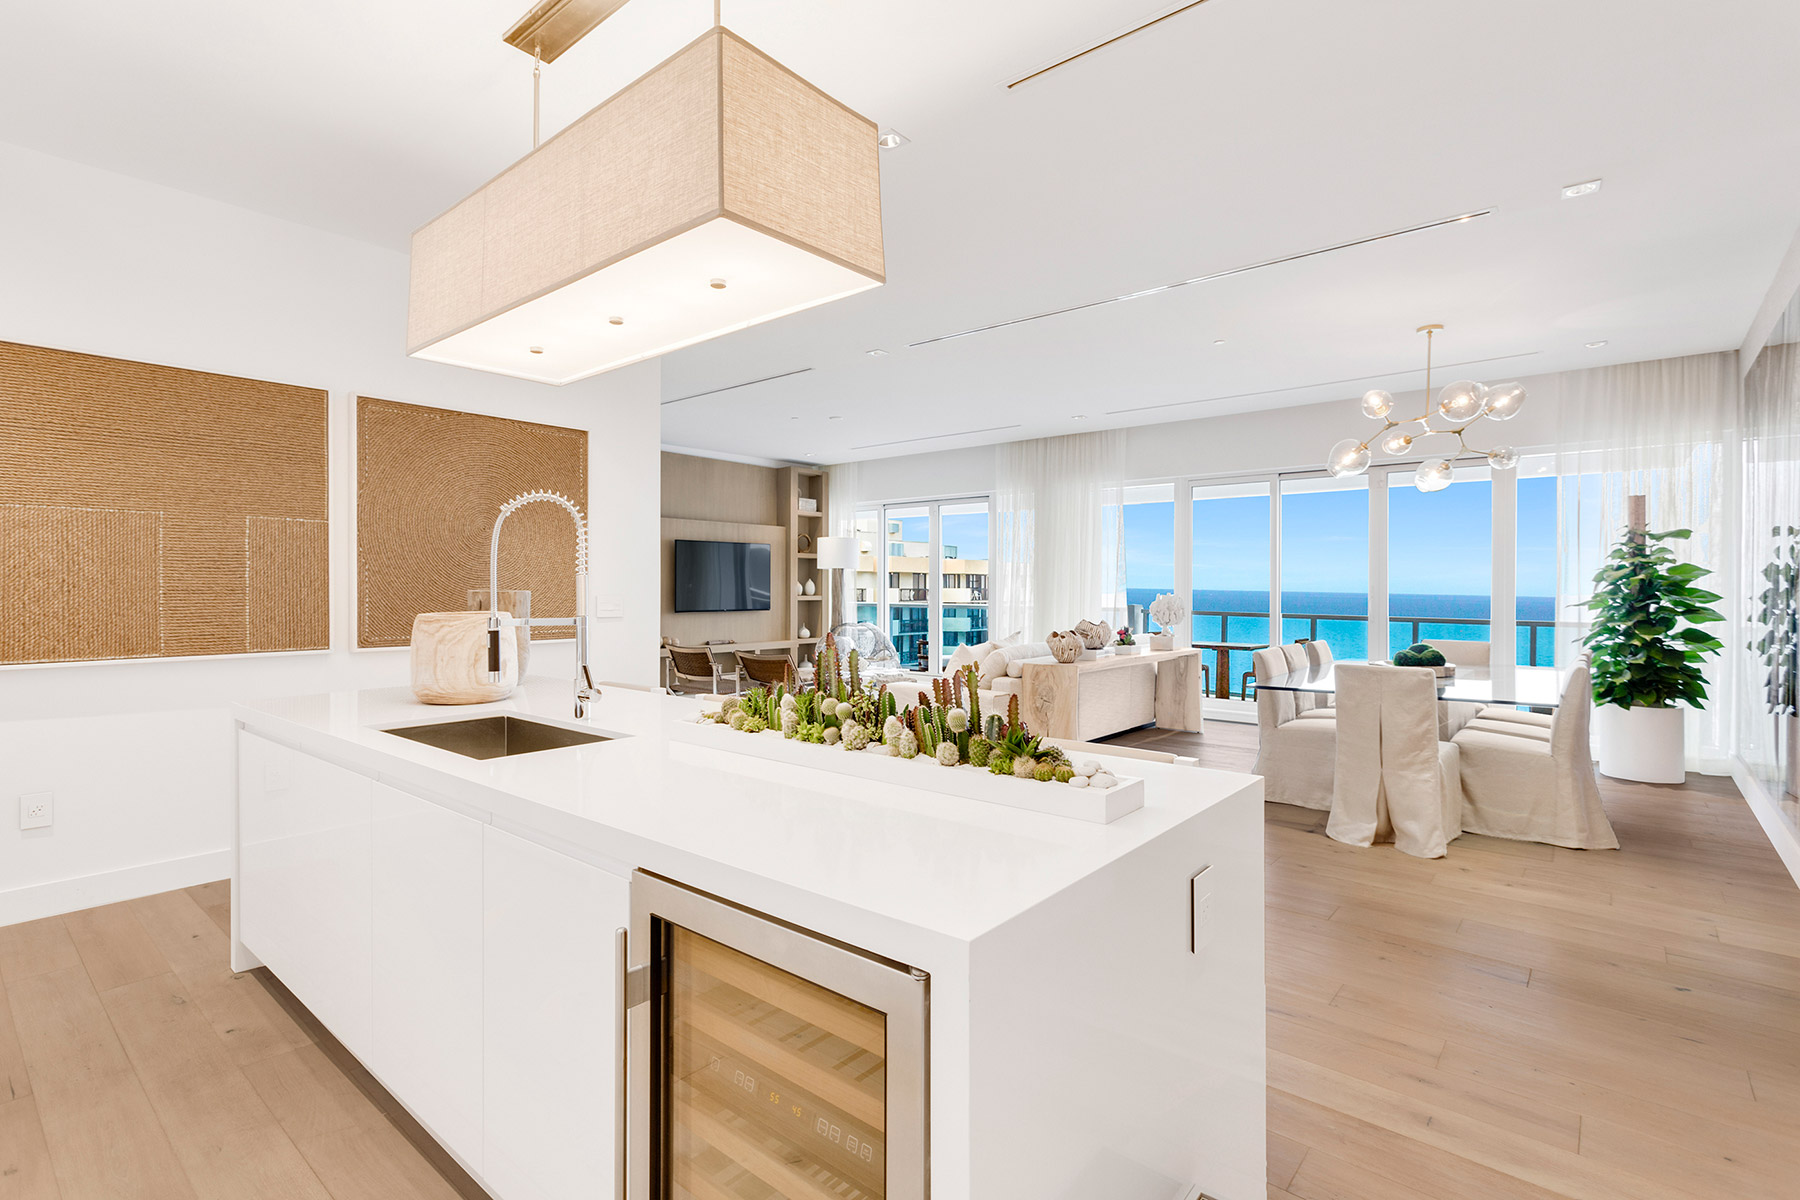 A 1 Hotel &amp; Homes penthouse kitchen overlooking the ocean